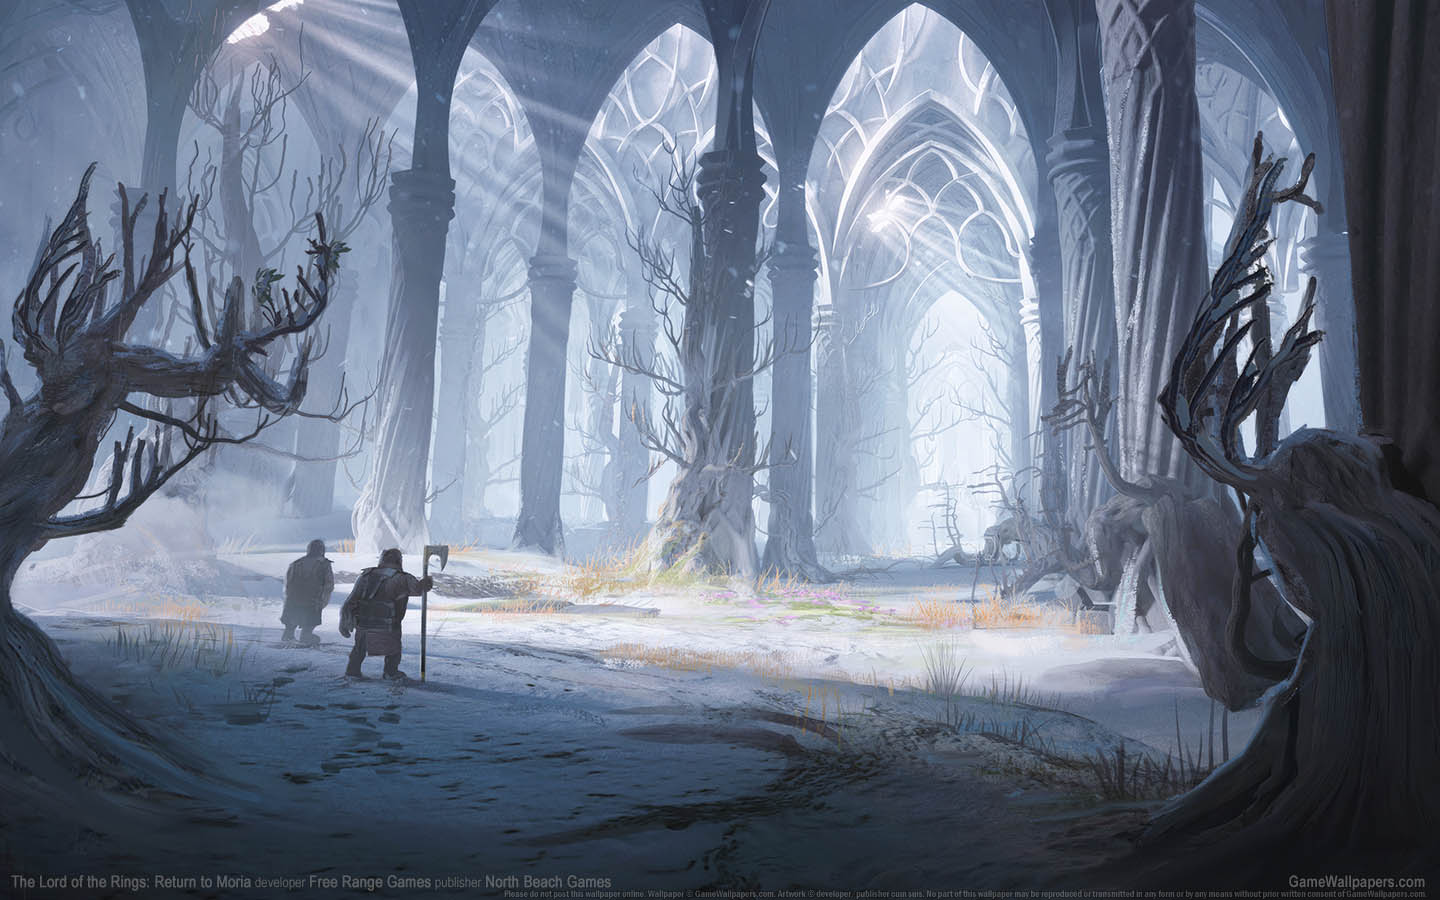 The Lord of the Rings: Return to Moria fond d'cran 06 1440x900